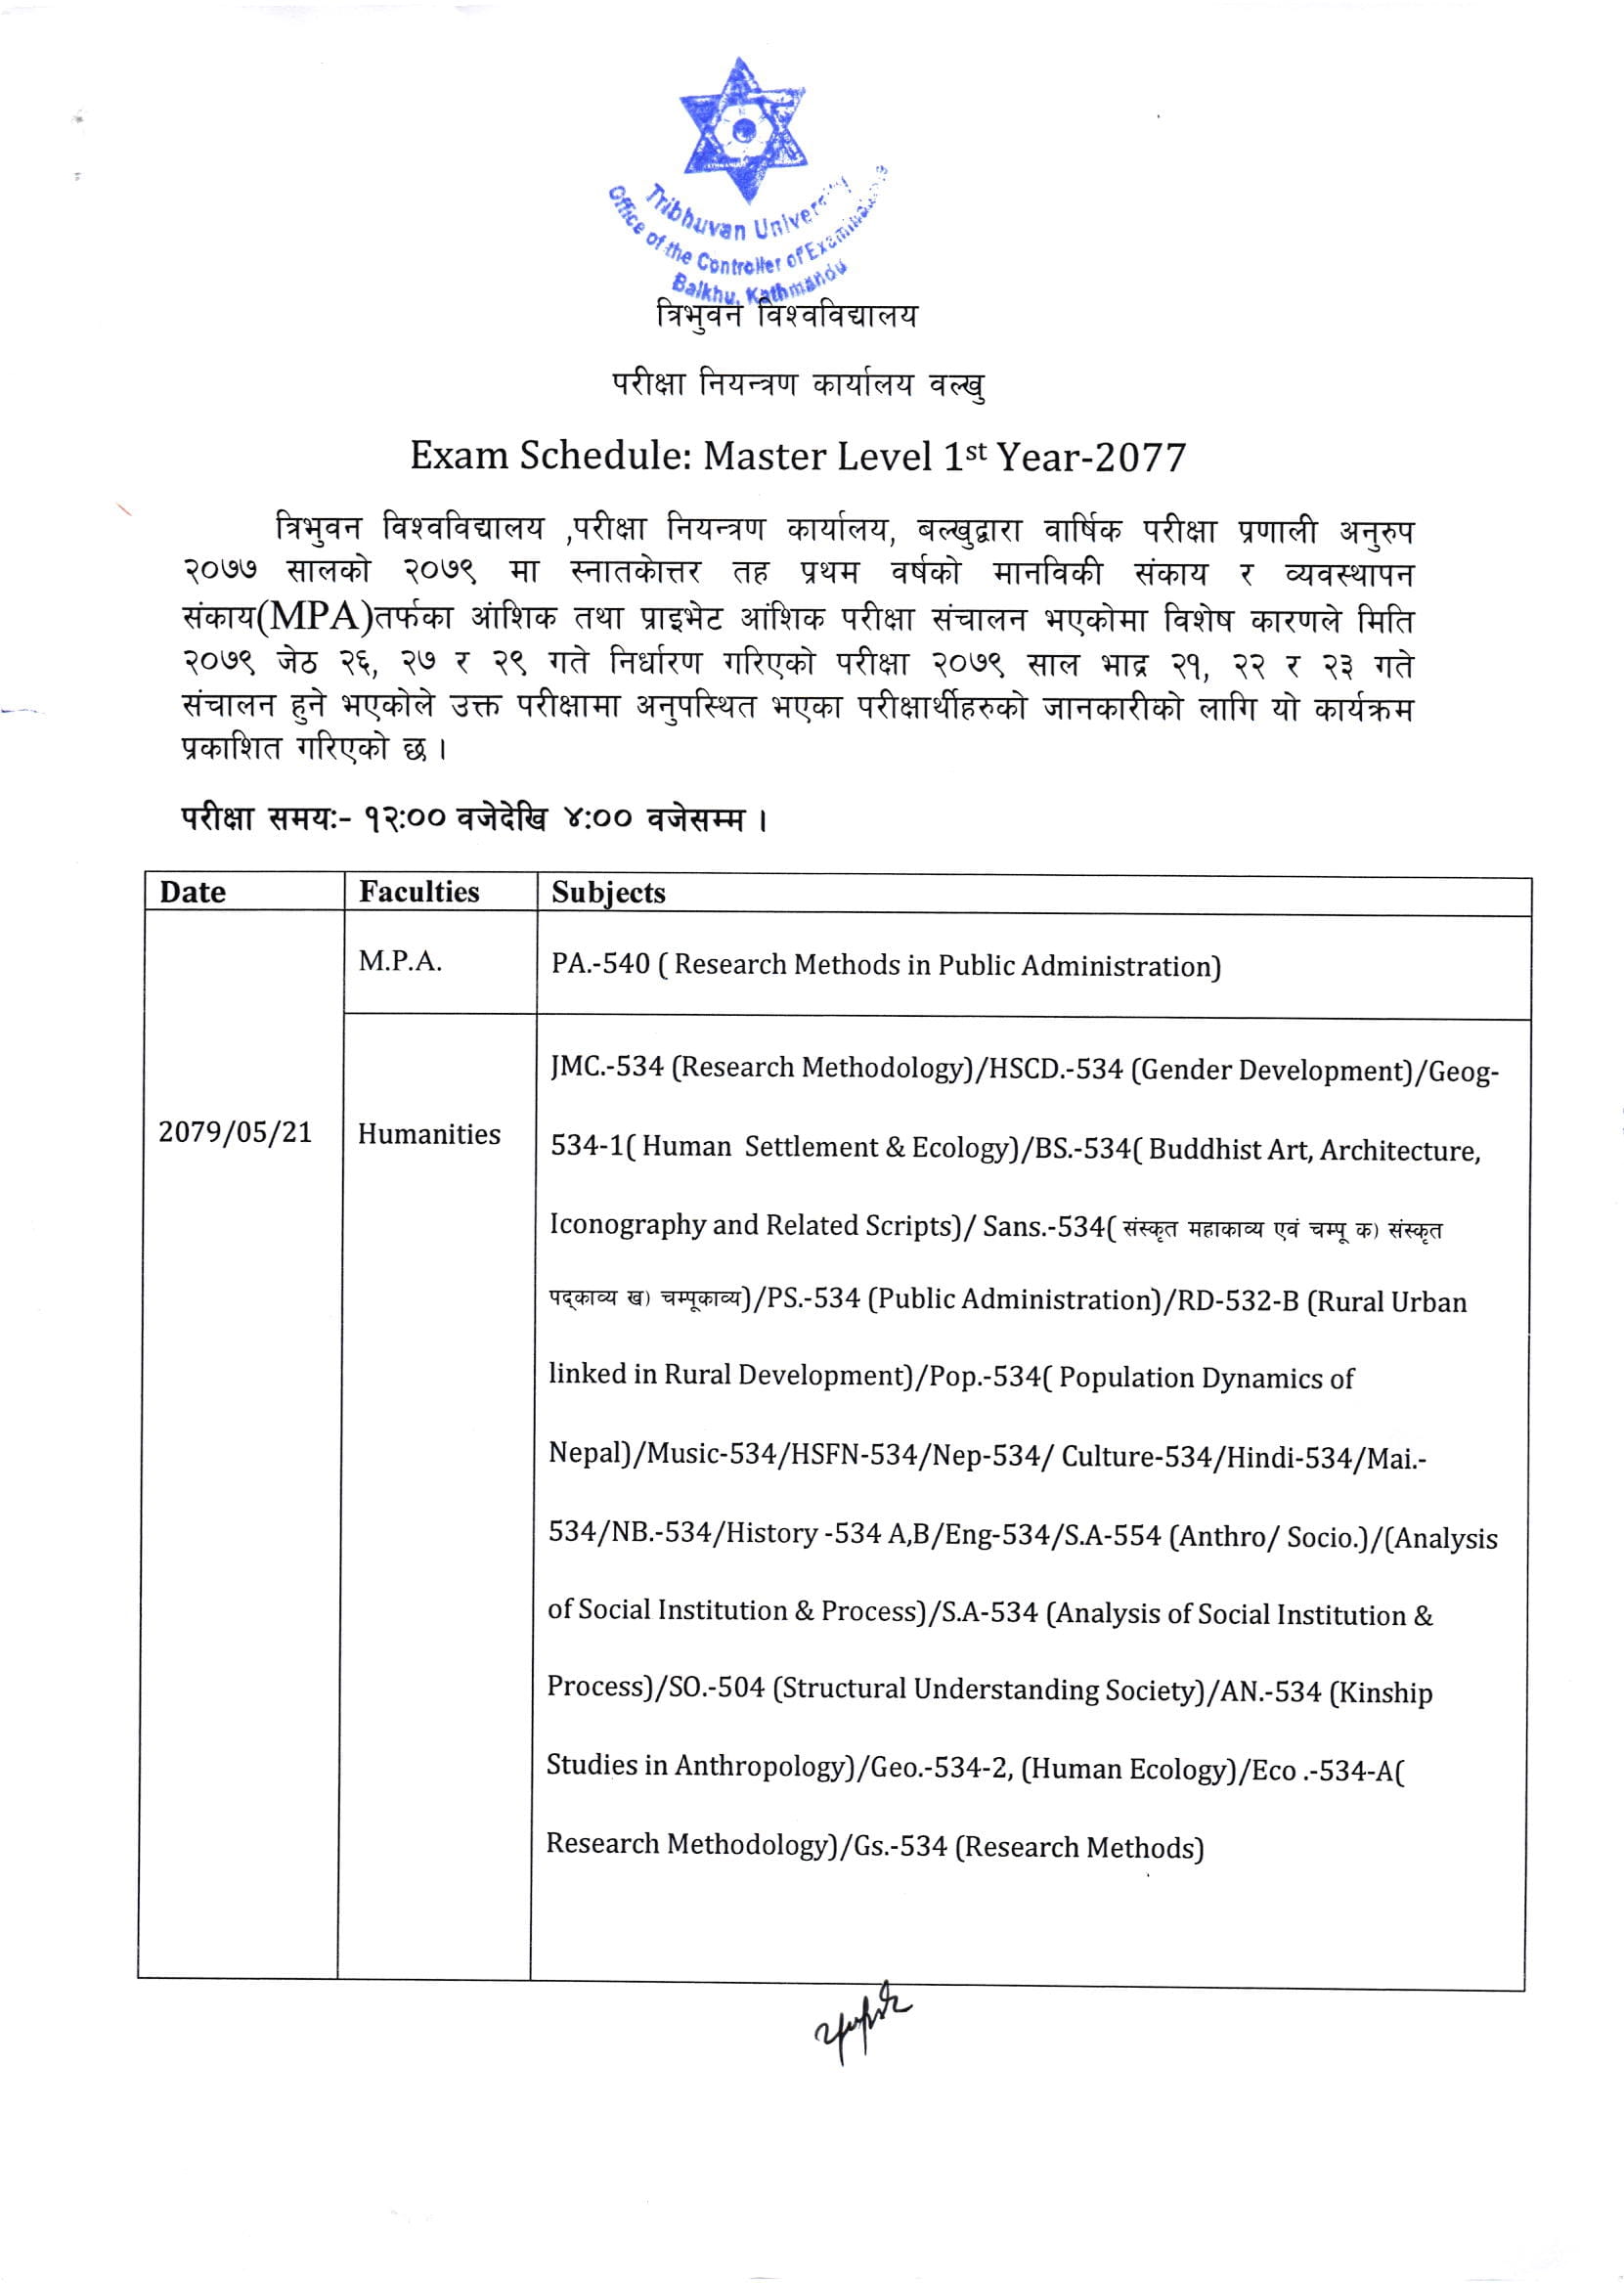 Exam Schedule of Master Level 1st and 2nd 2079 Is Published